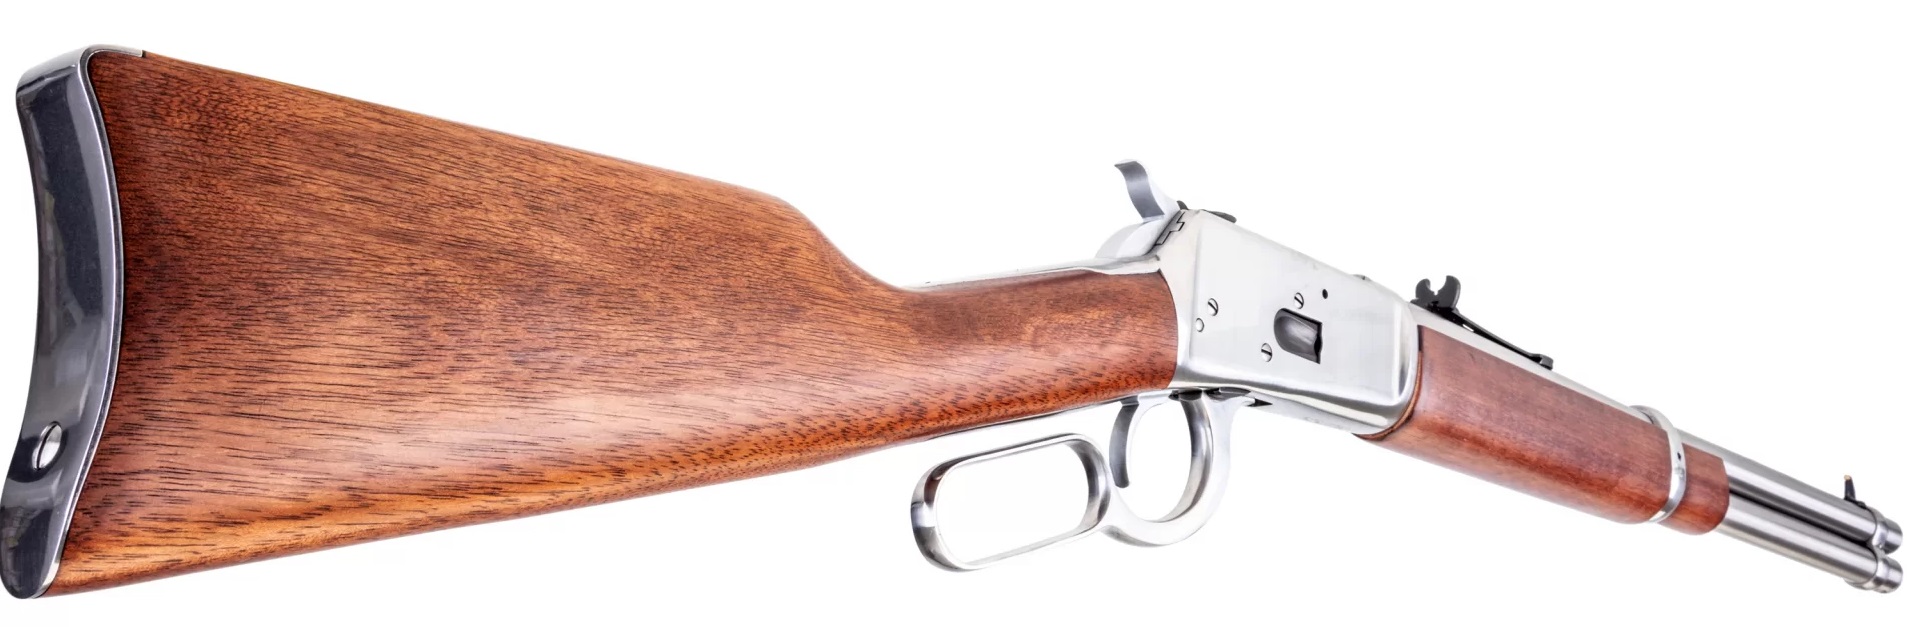 Review of Rossi Stainless 45 Colt Lever Action - 1895Gunner